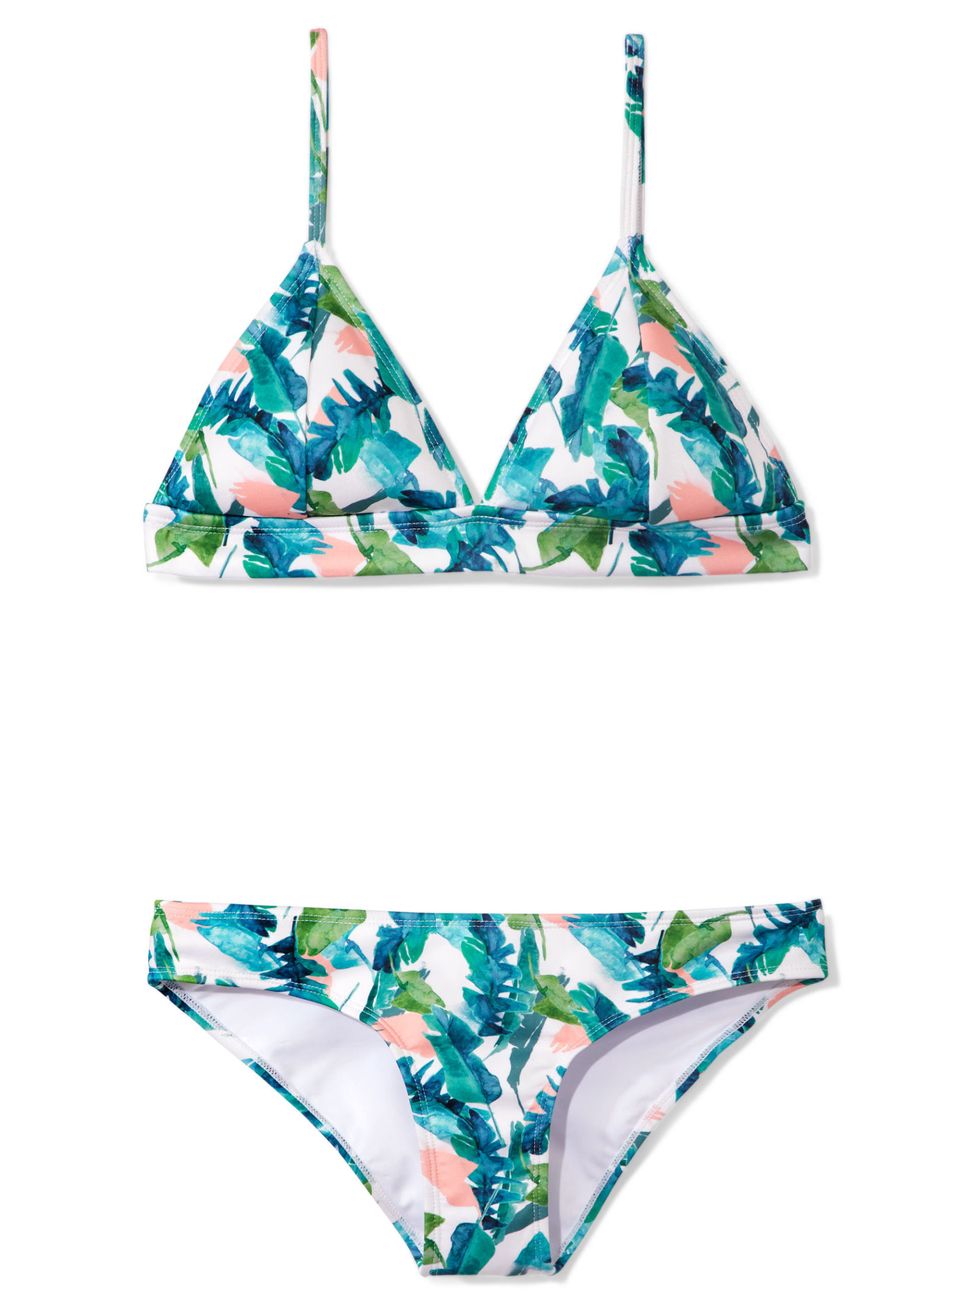 27 Sexy Bathing Suits for Women - Flattering Women's Swimsuits